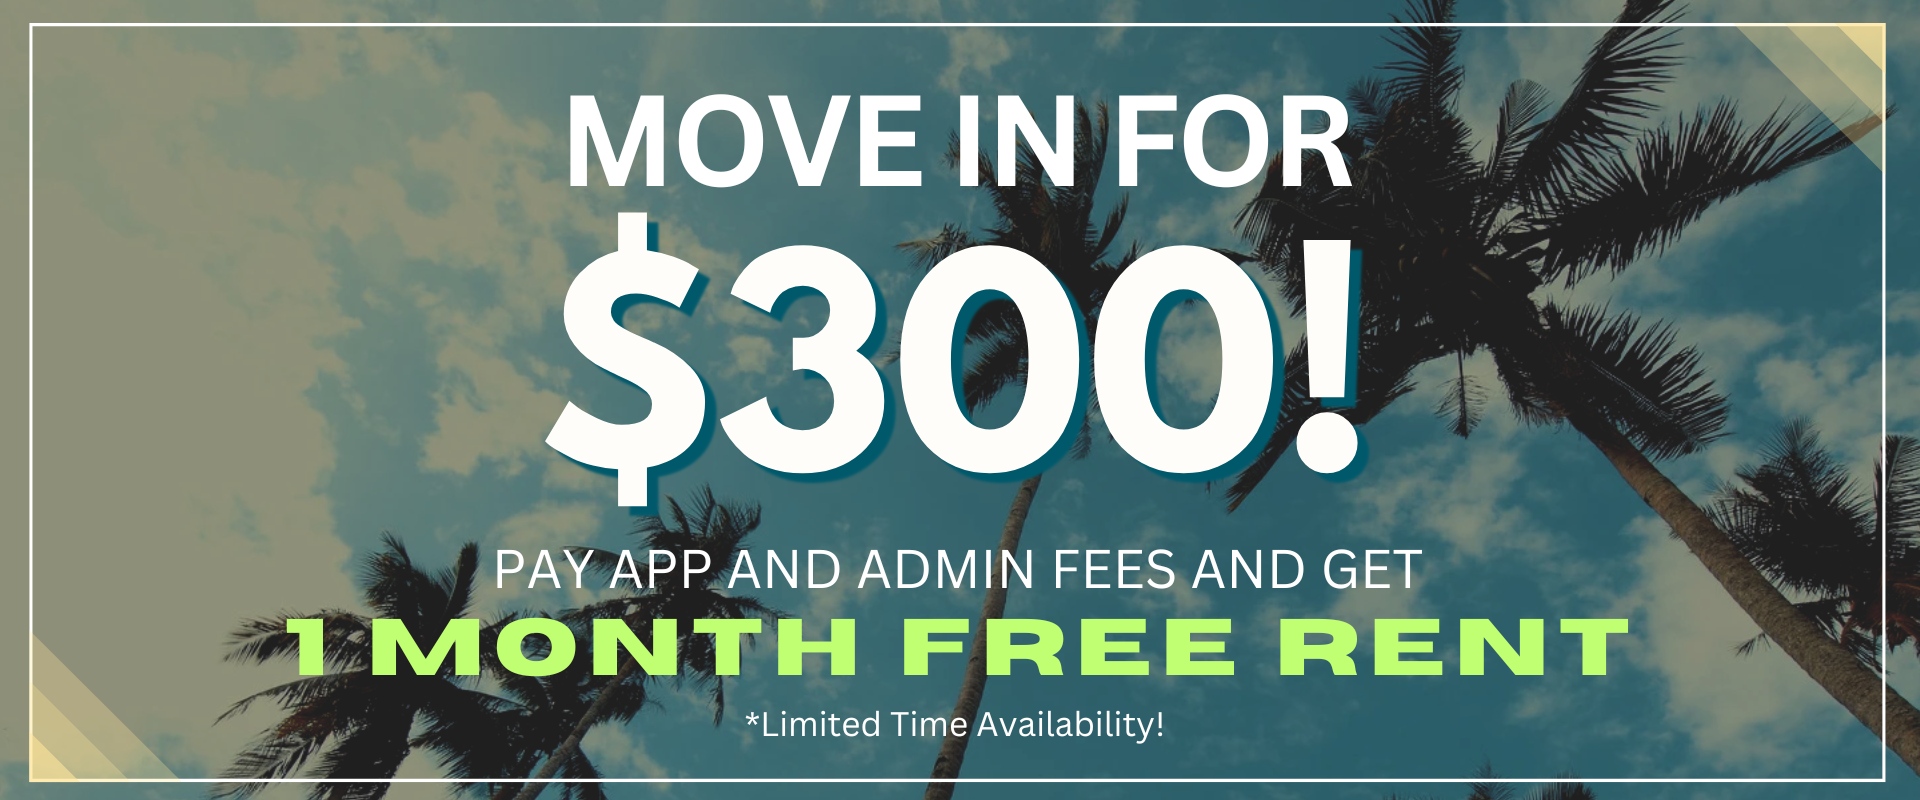 MOVE IN FOR $300!! Pay app and admin fees and get 1 month free rent, limited time availability!